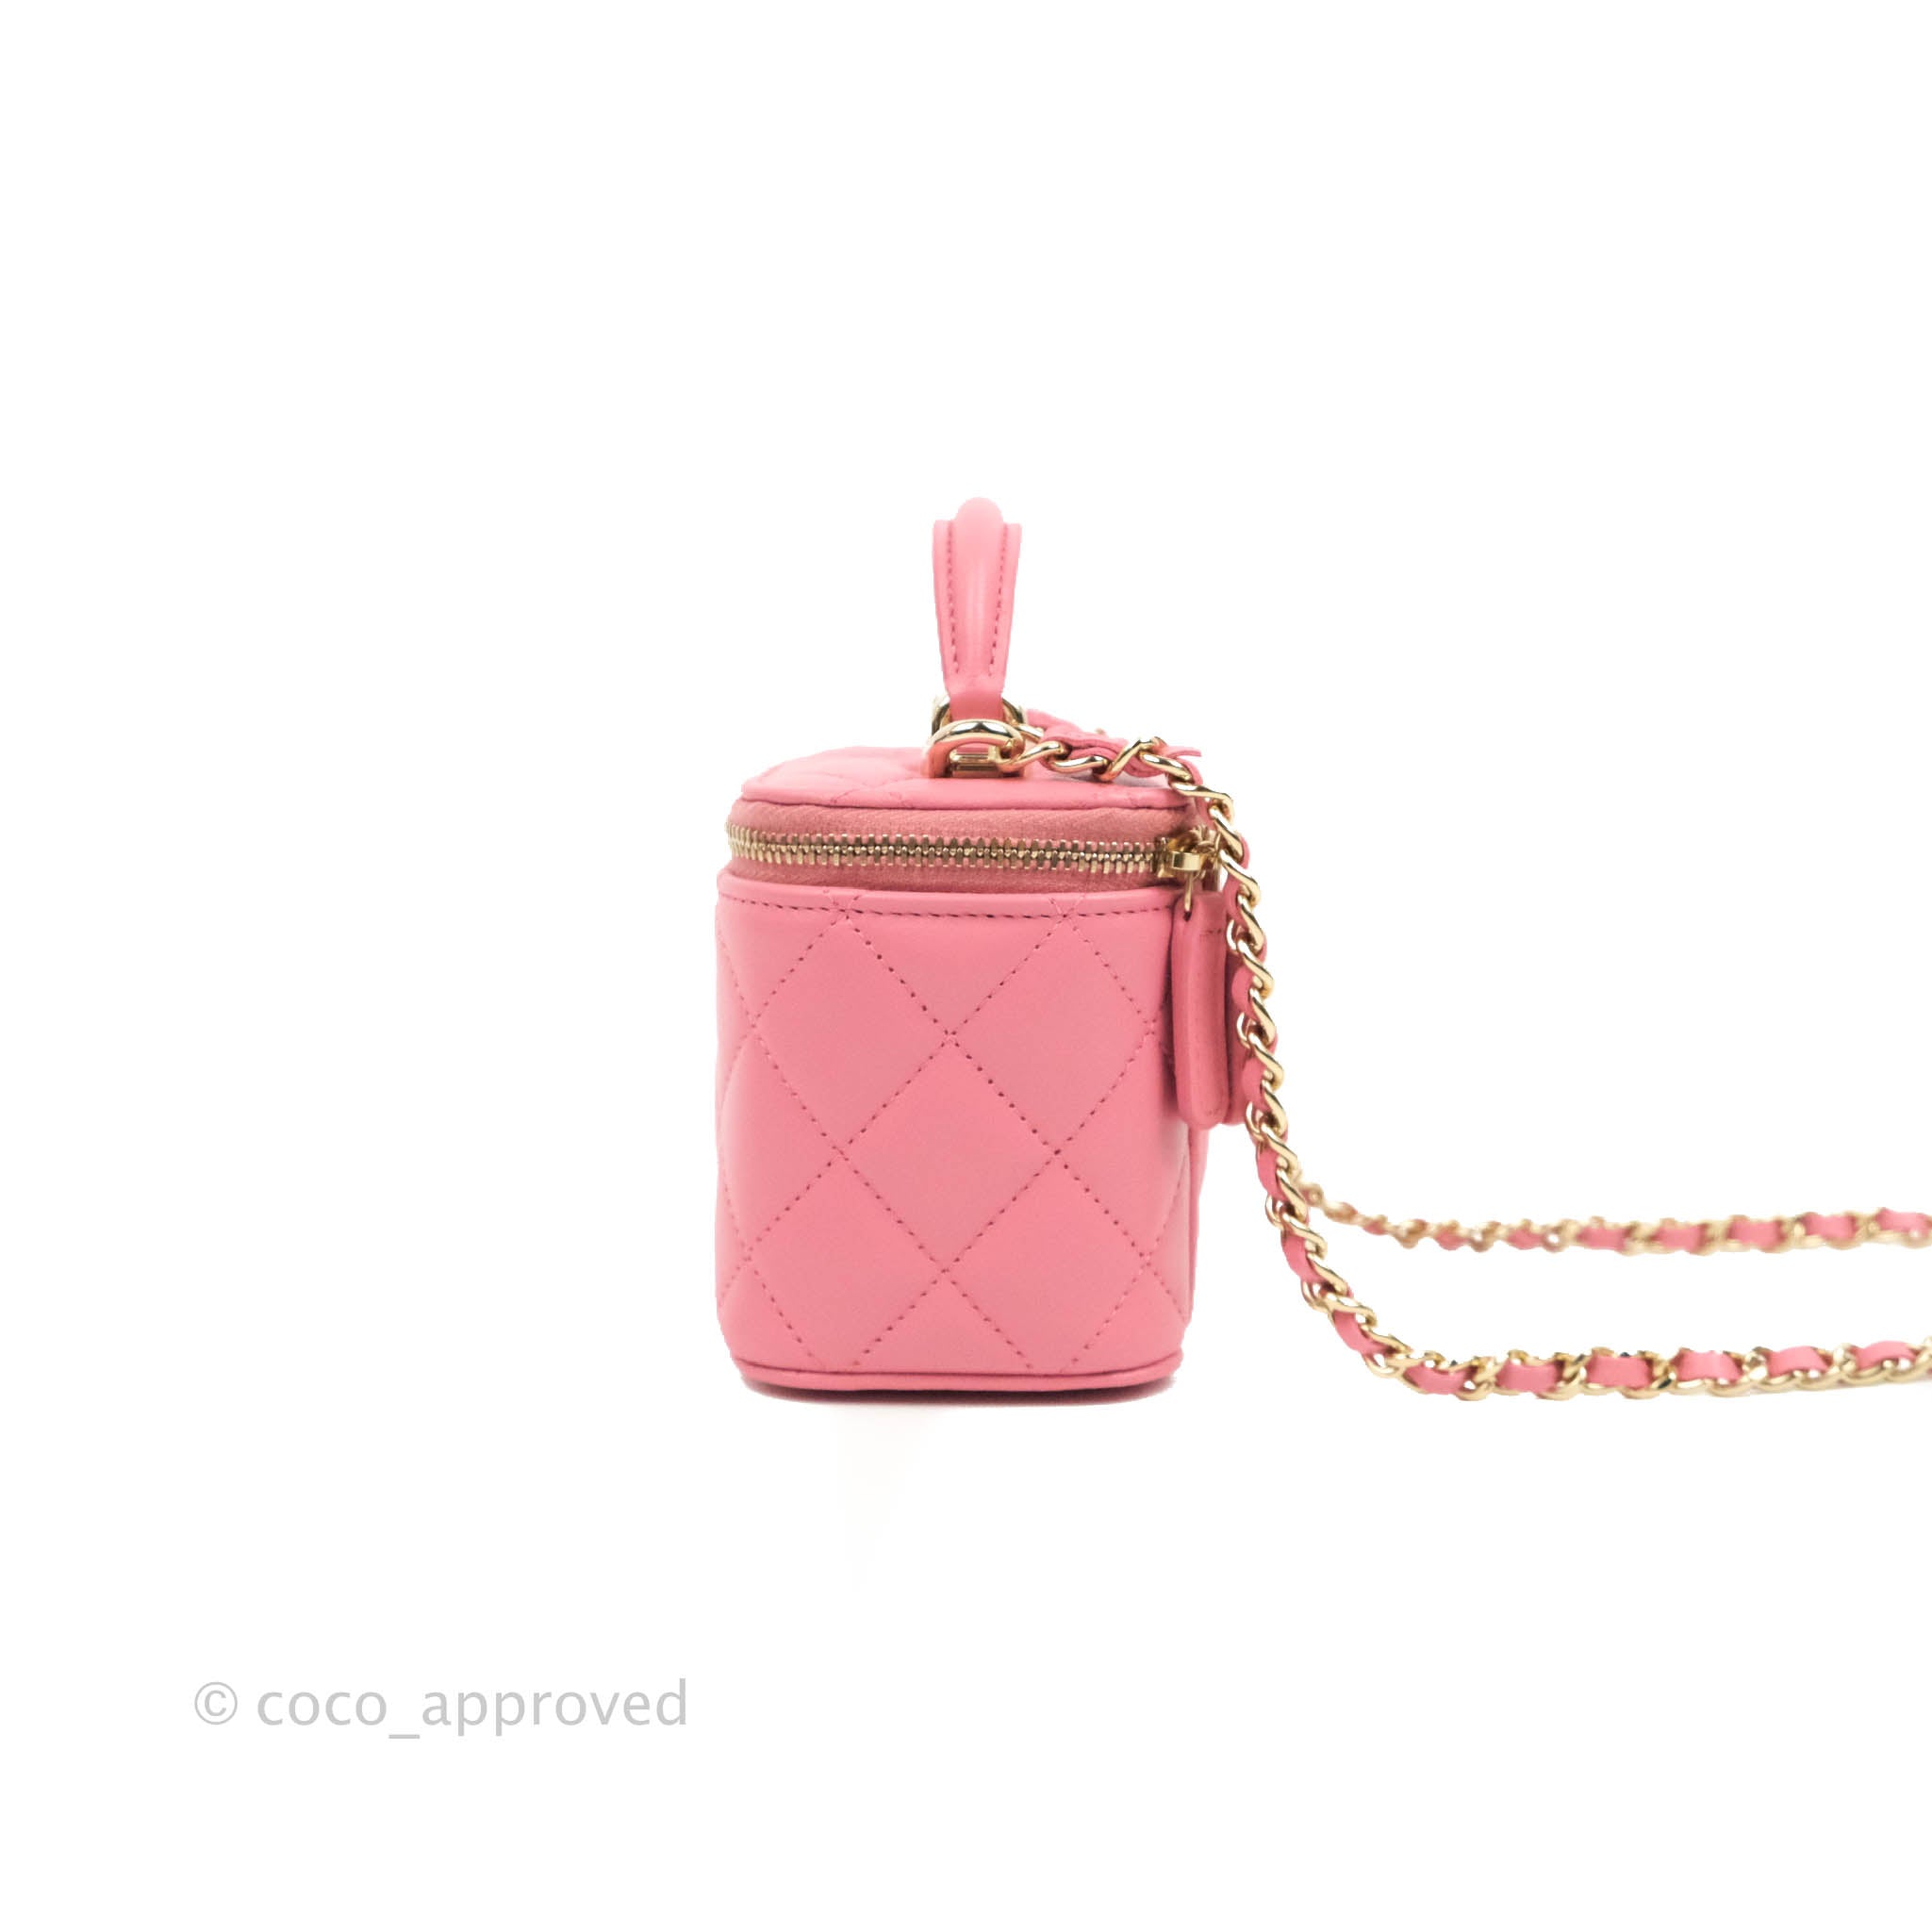 Chanel's Mini Vanity Case Bag Fits In One Hand & Reminds Us That Good  Things Come In Small Packages 